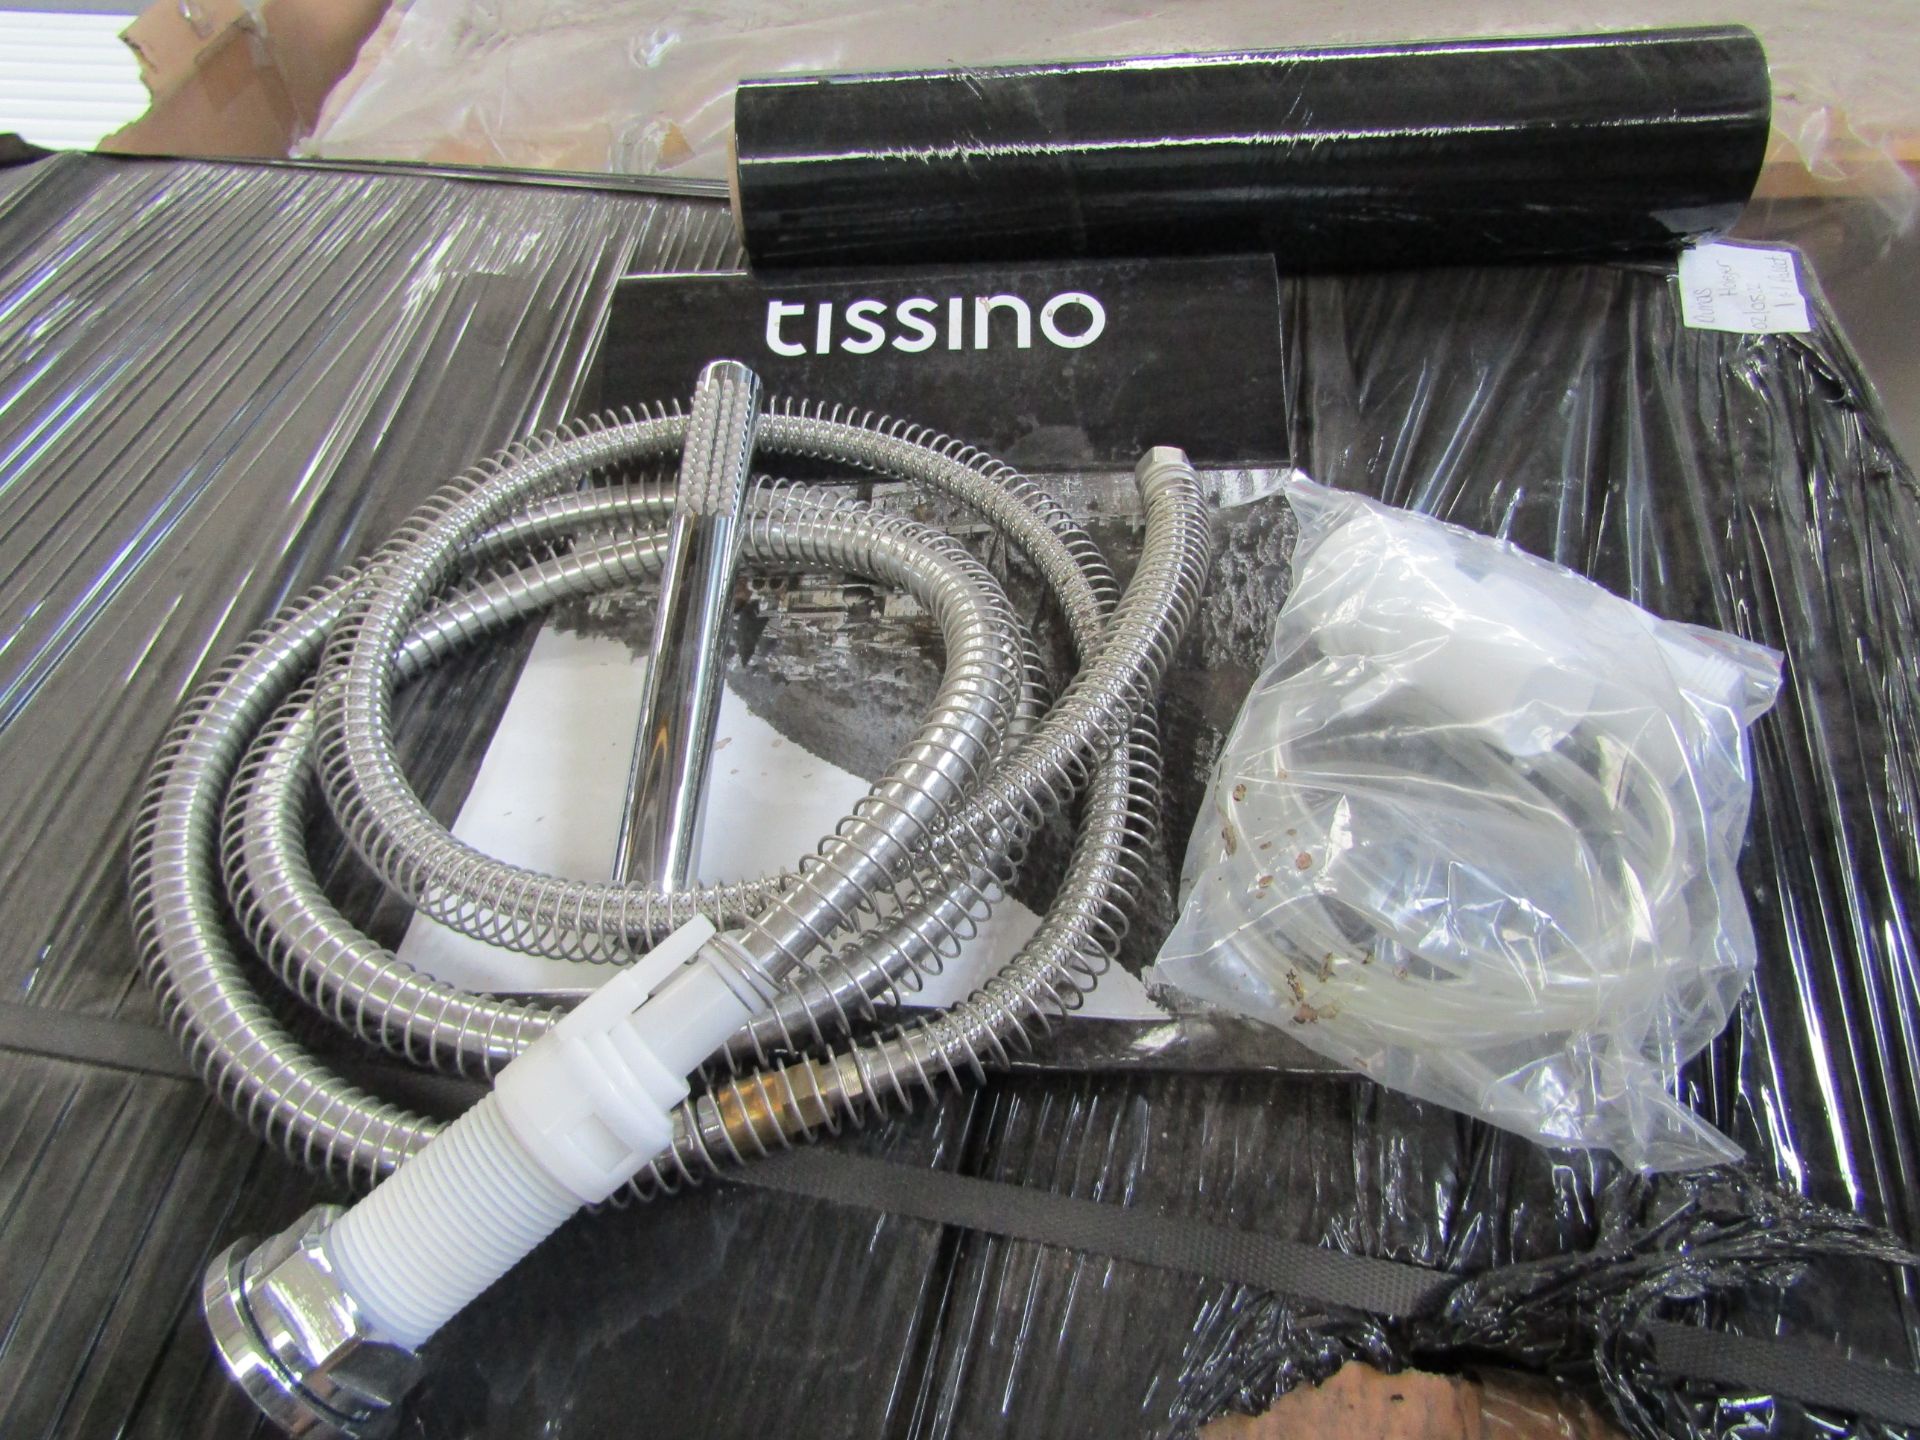 Pallet of approx 72x Tassino Mario Series Bath shower Hand set, new and boxed